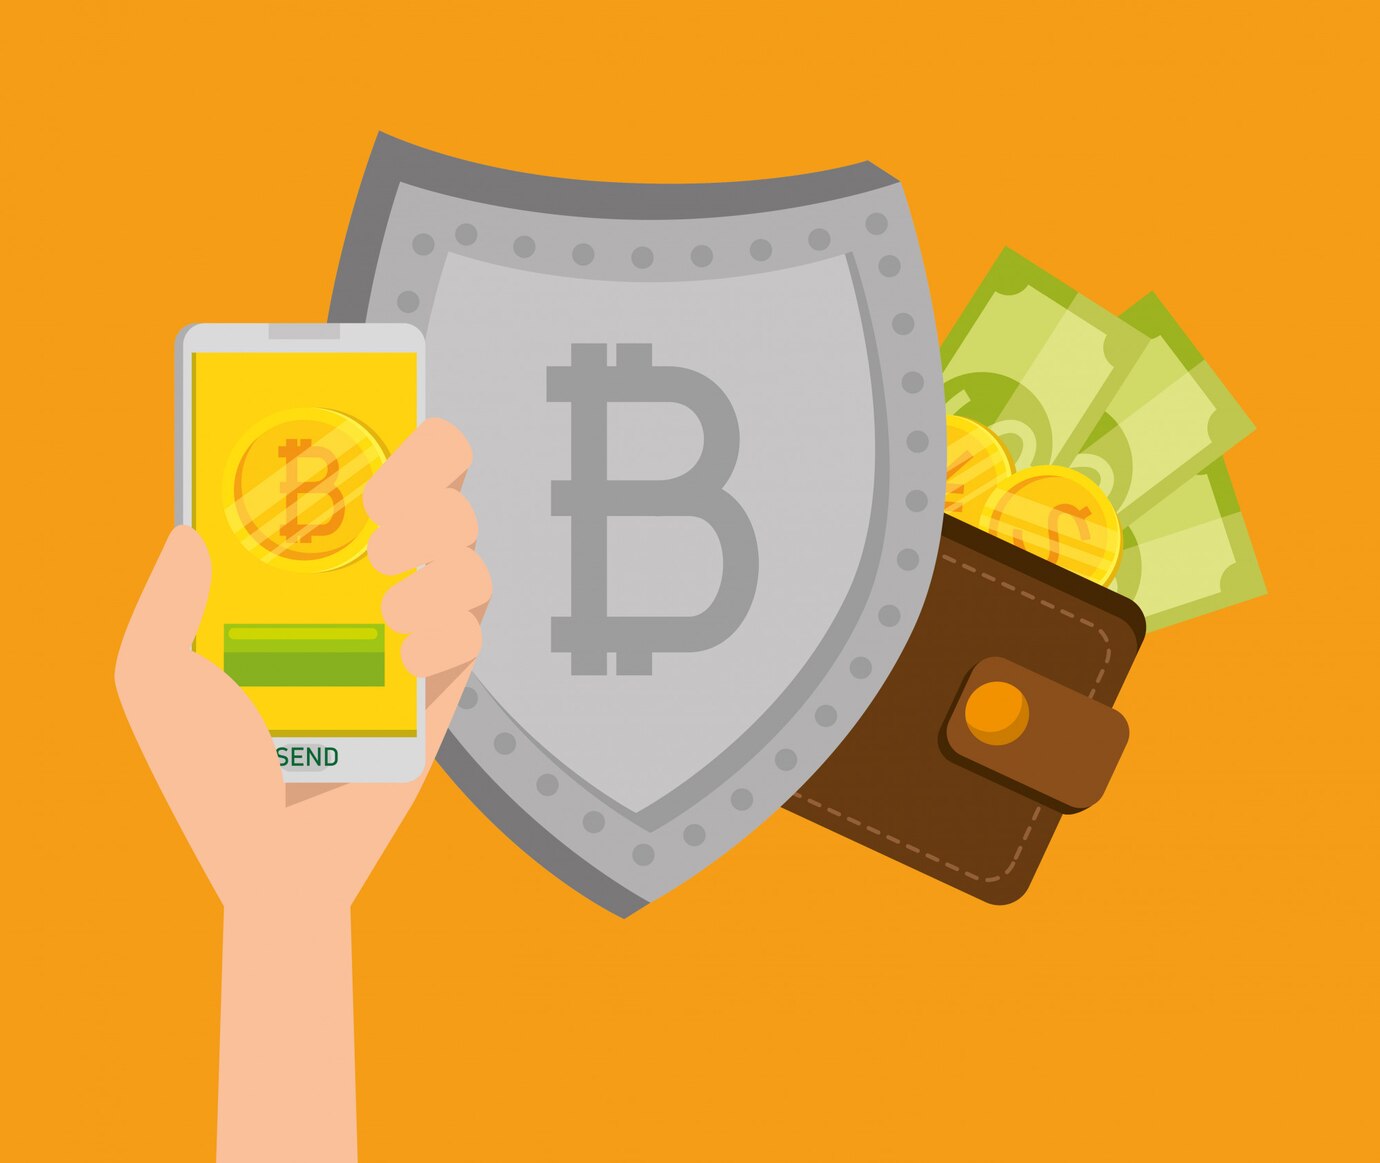 Is It Difficult to Make Payments Using Bitcoin?